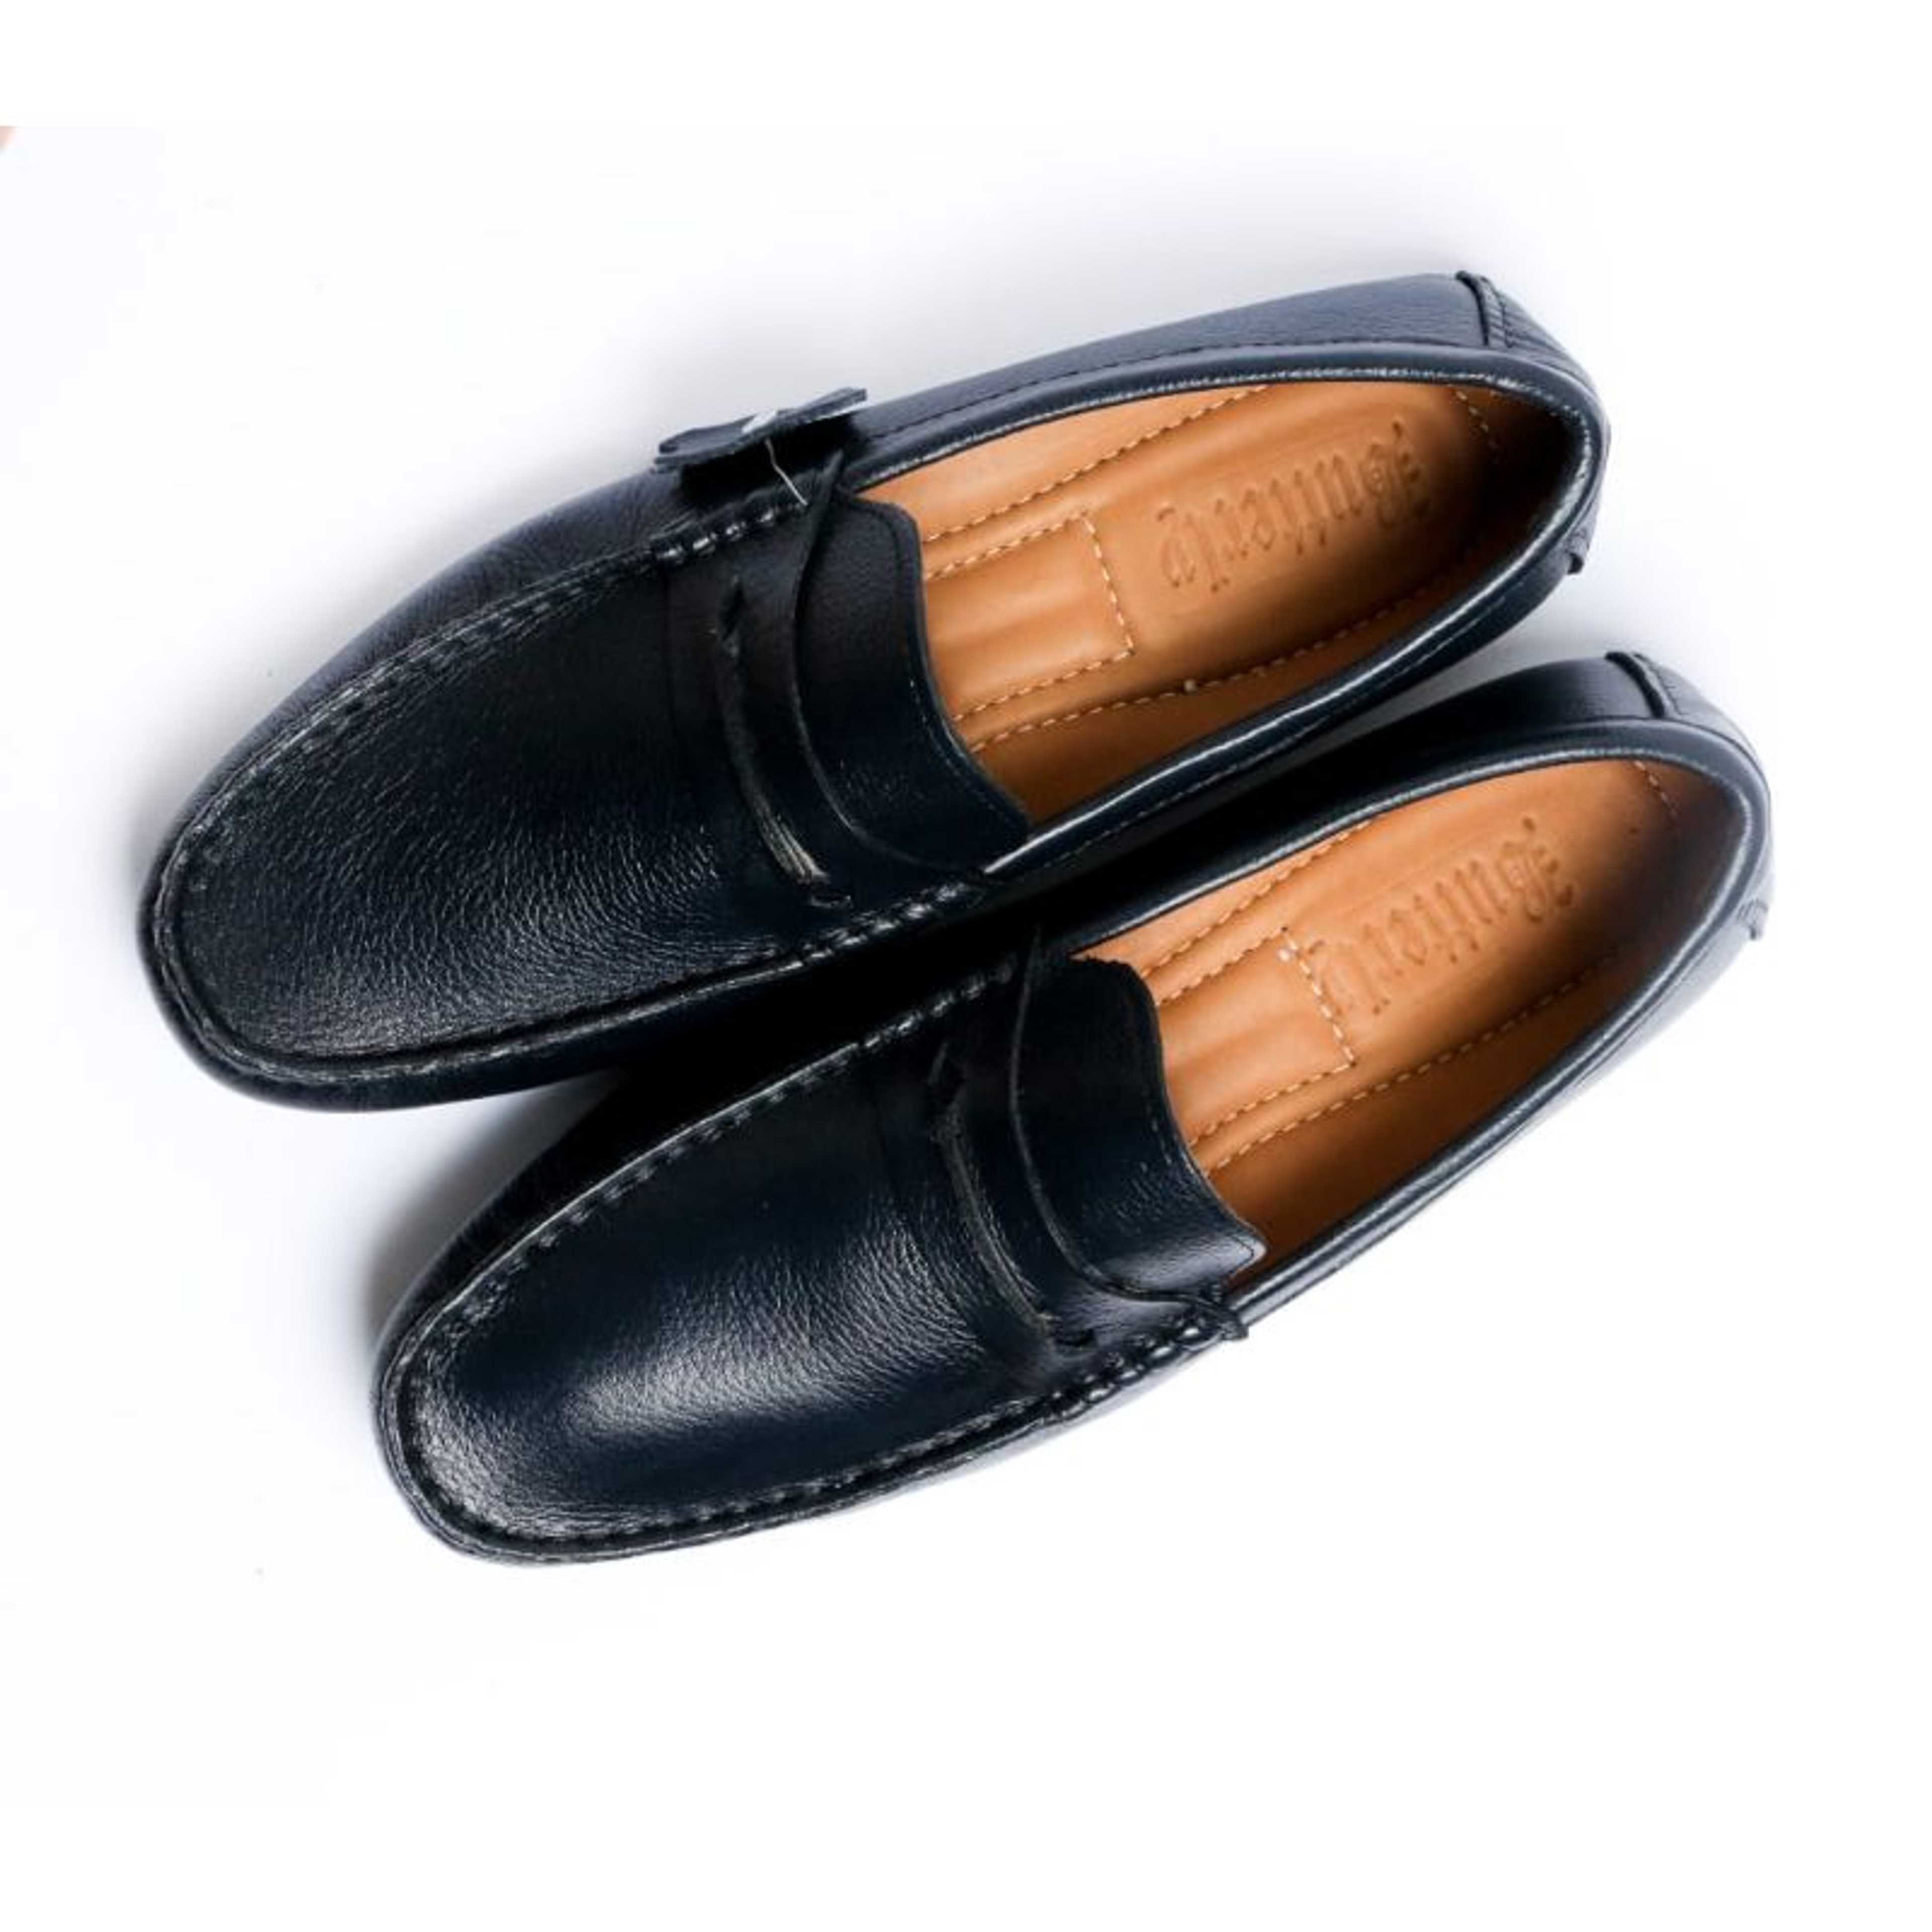 "Loafers Shoes Navy Color Uper Leather Sole Rubber"